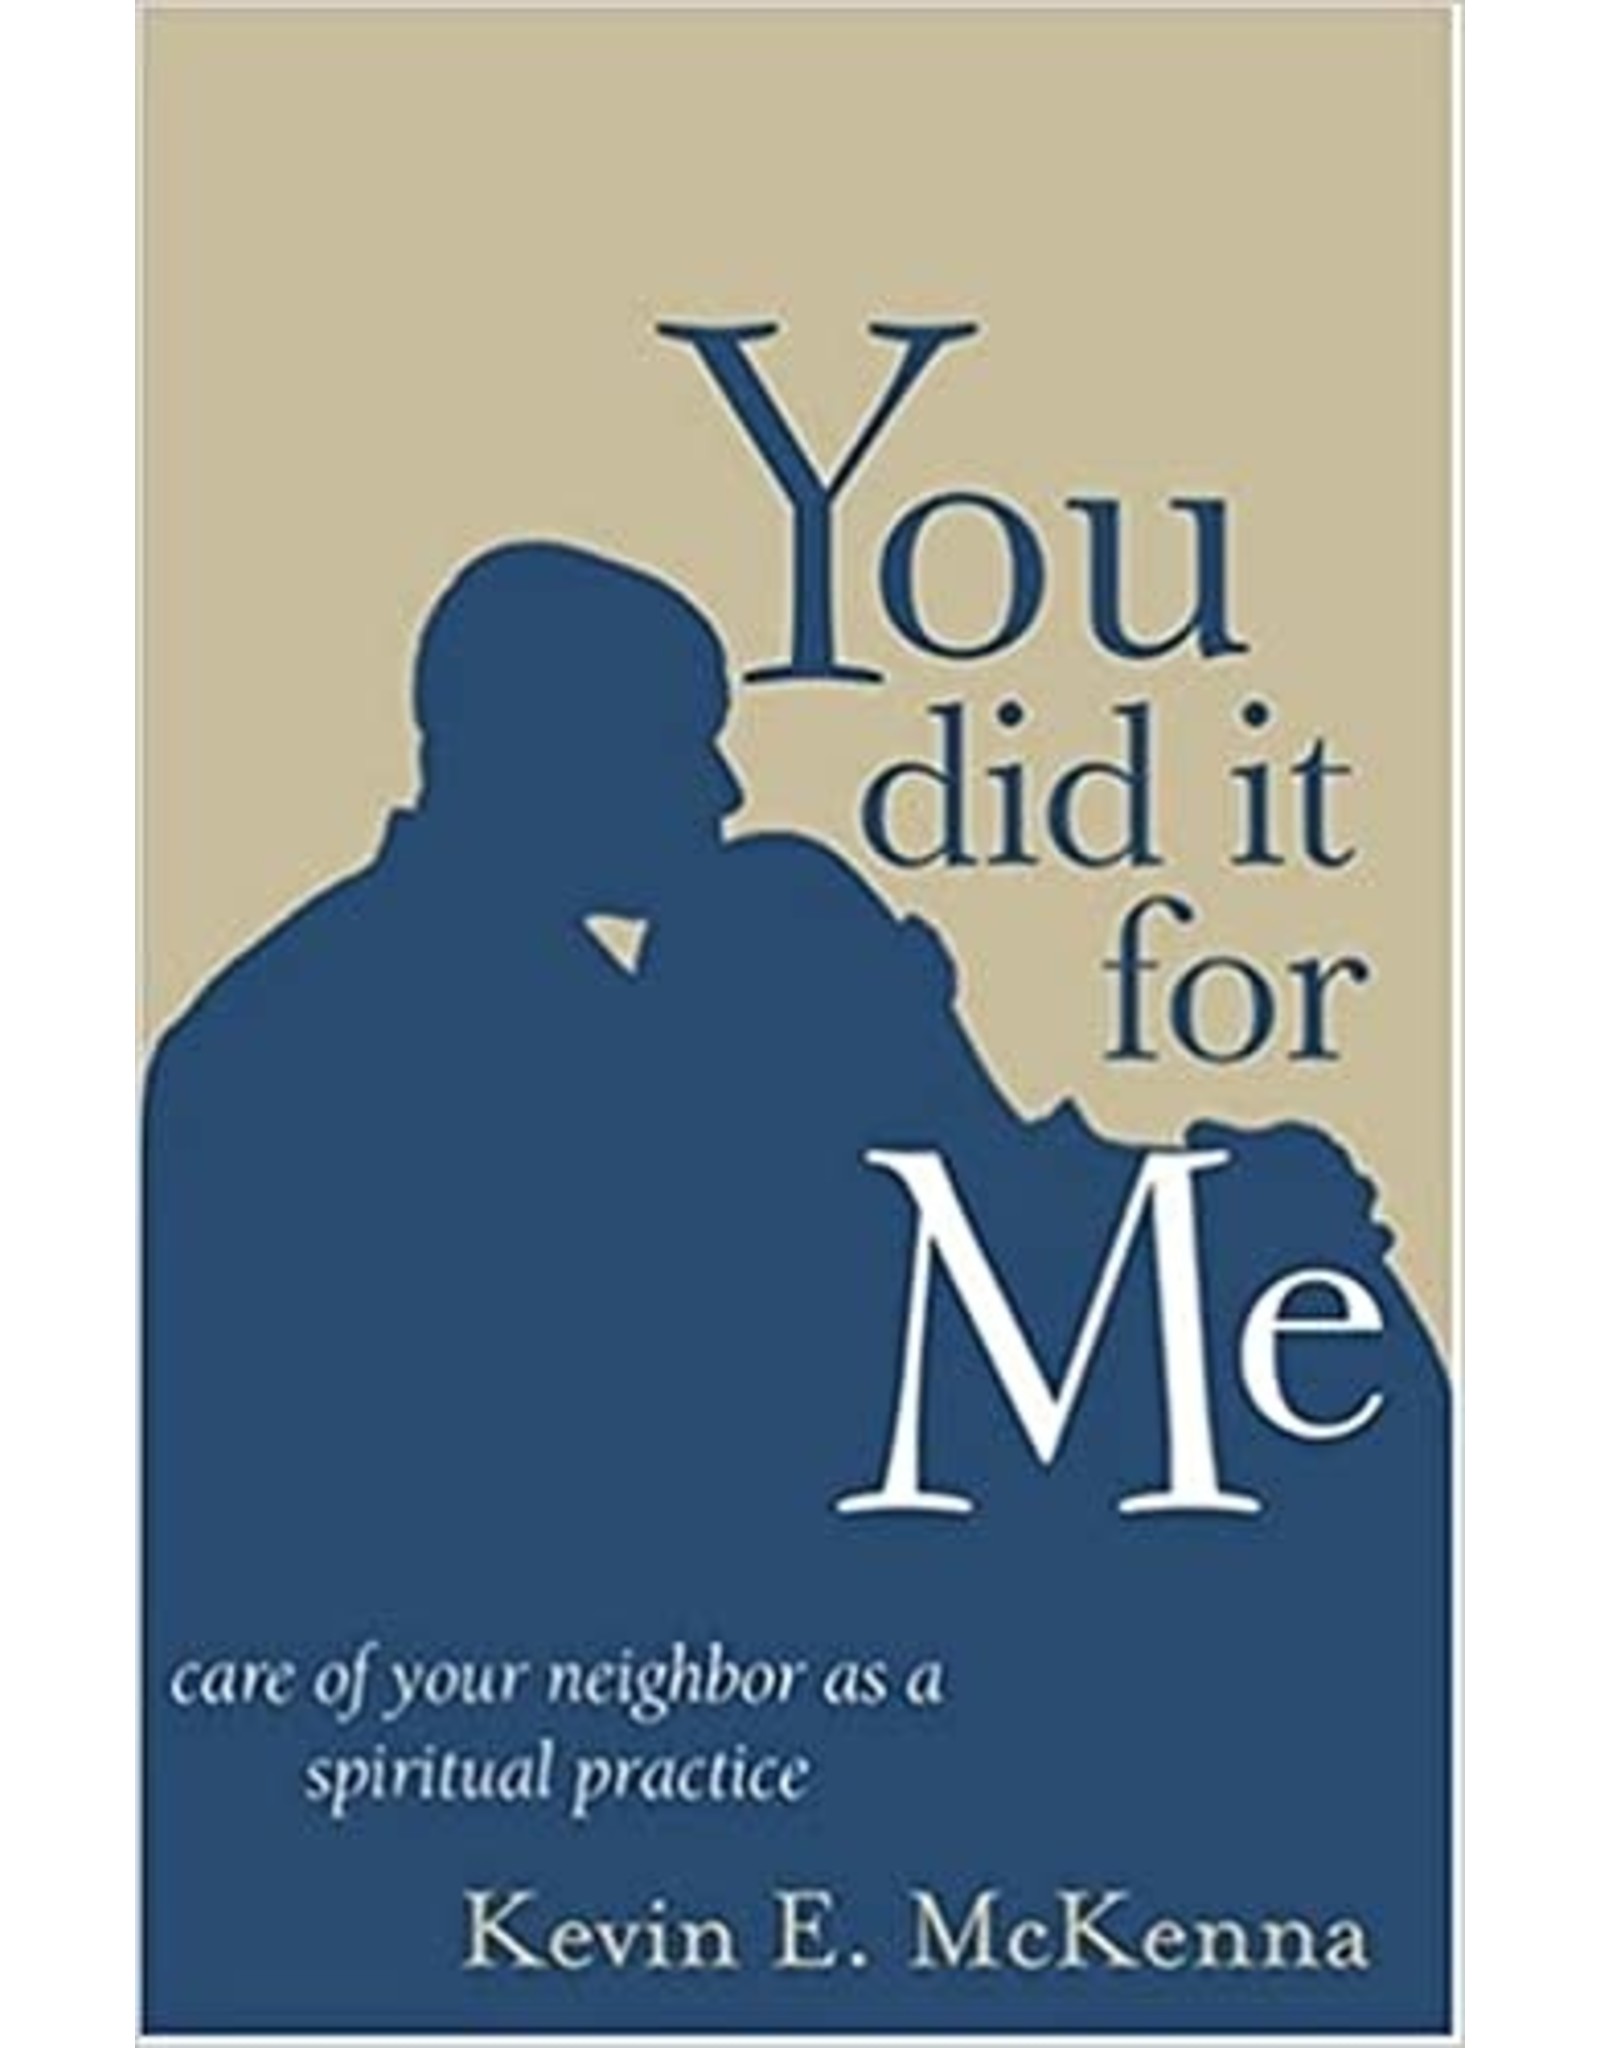 Ave Maria You Did It for Me: Care of Your Neighbor as a Spiritual Practice